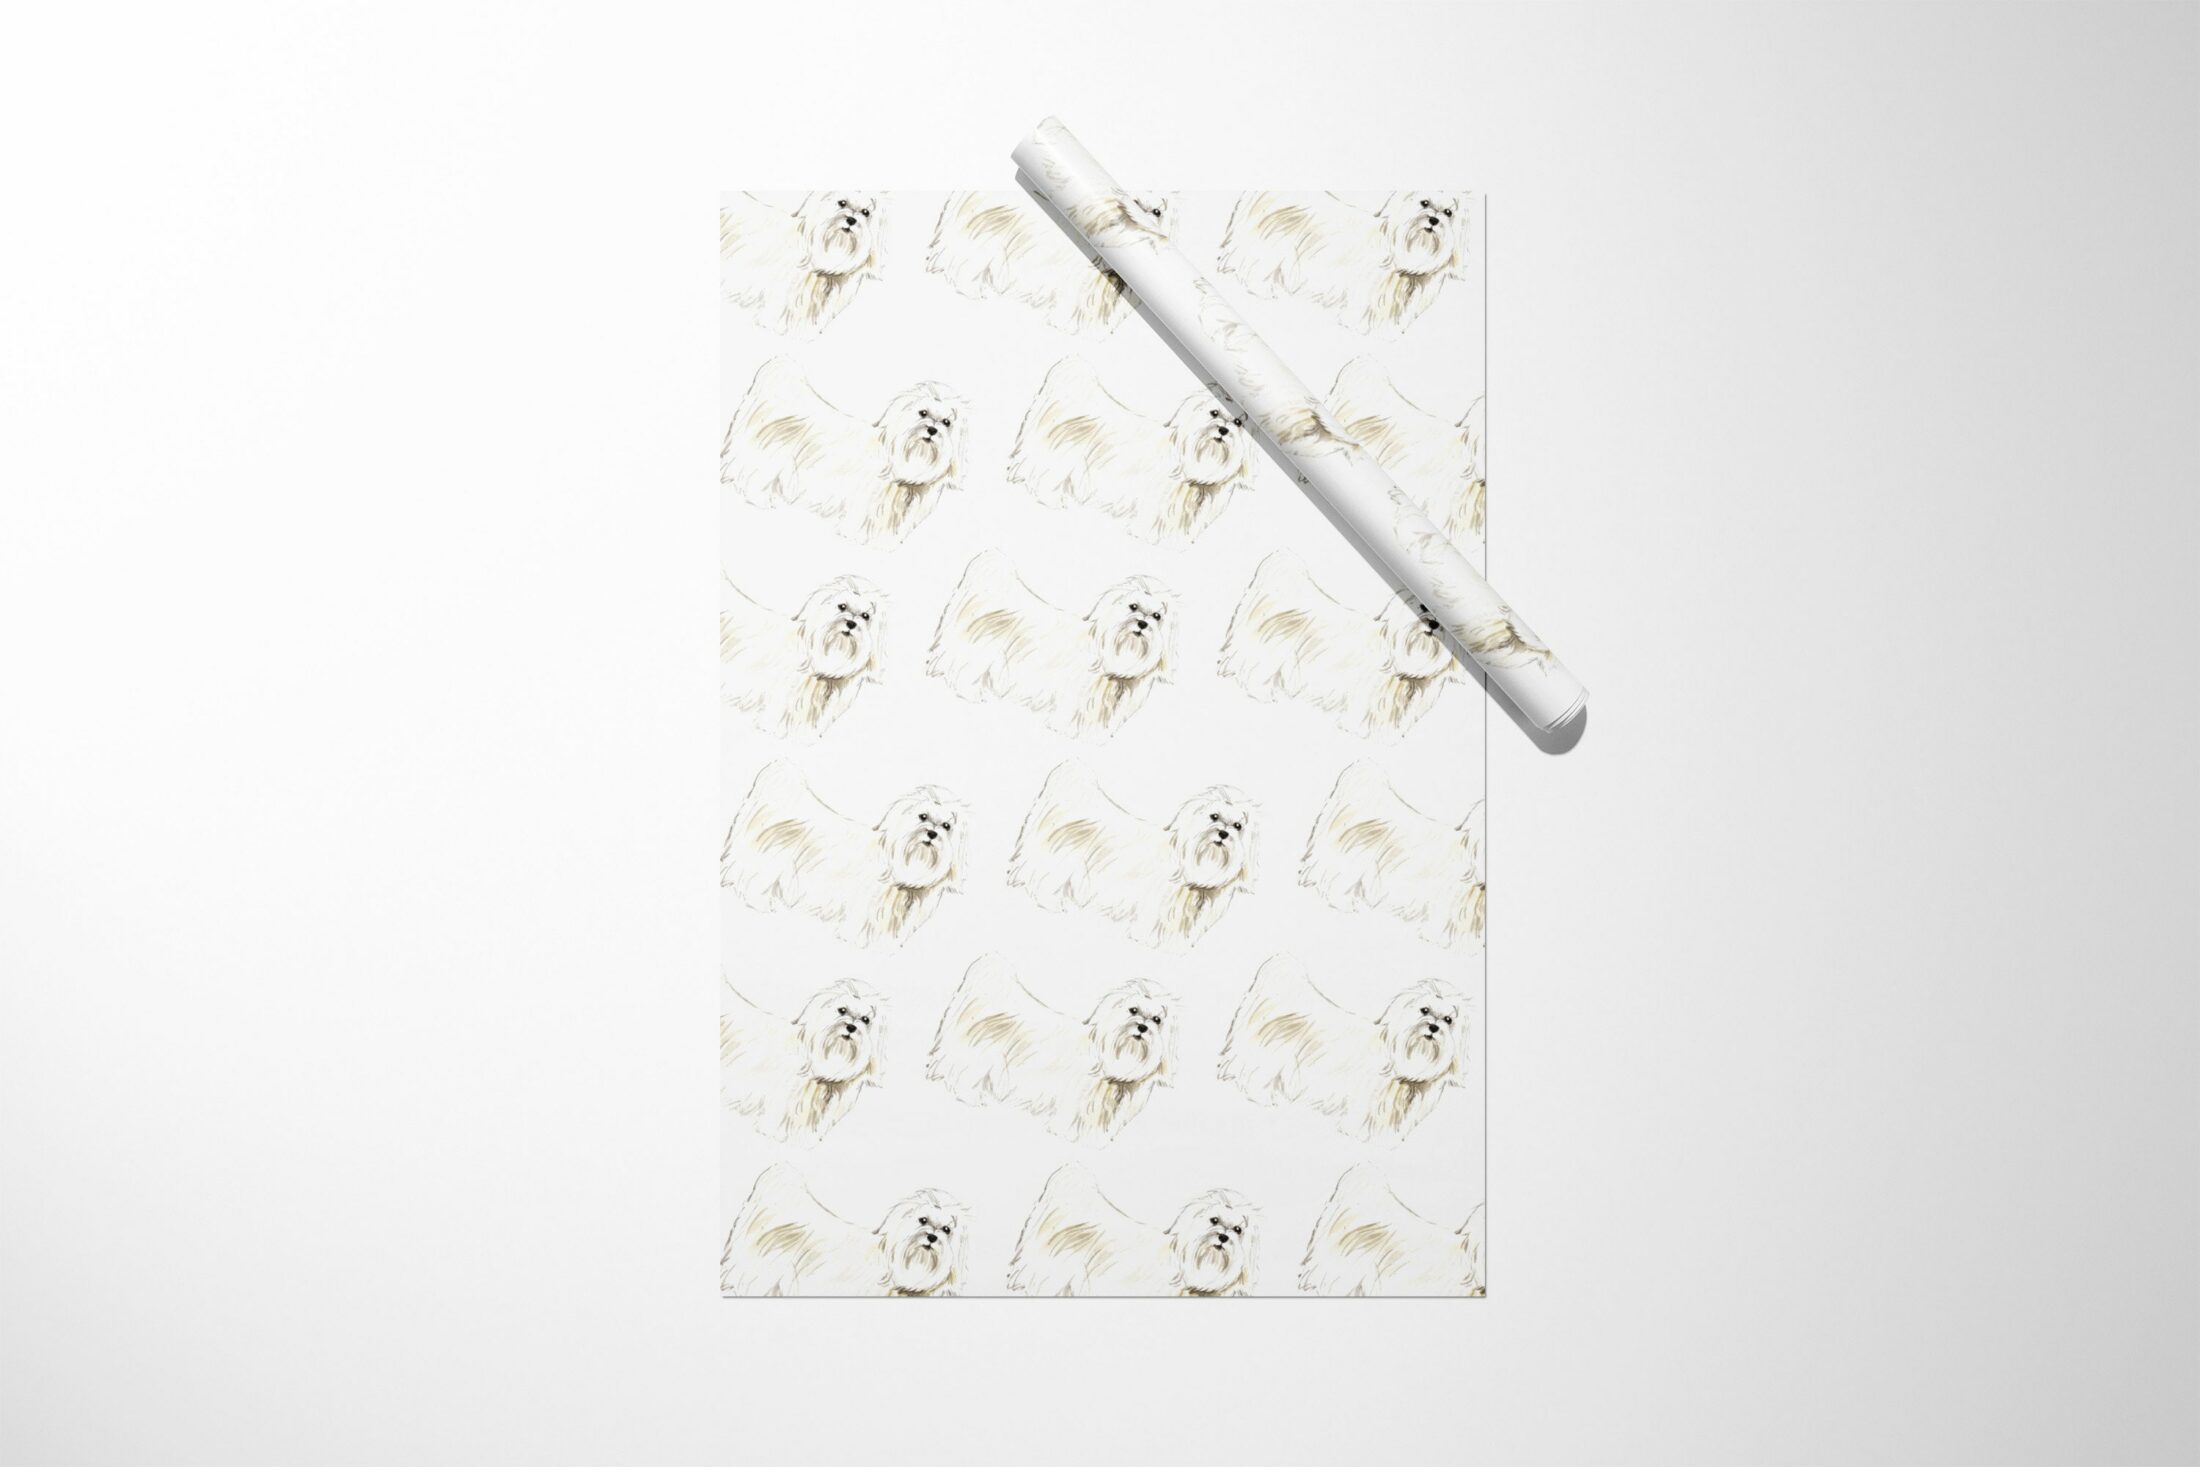 A Maltese Dog Wrapping Paper with a Christmas design on it.